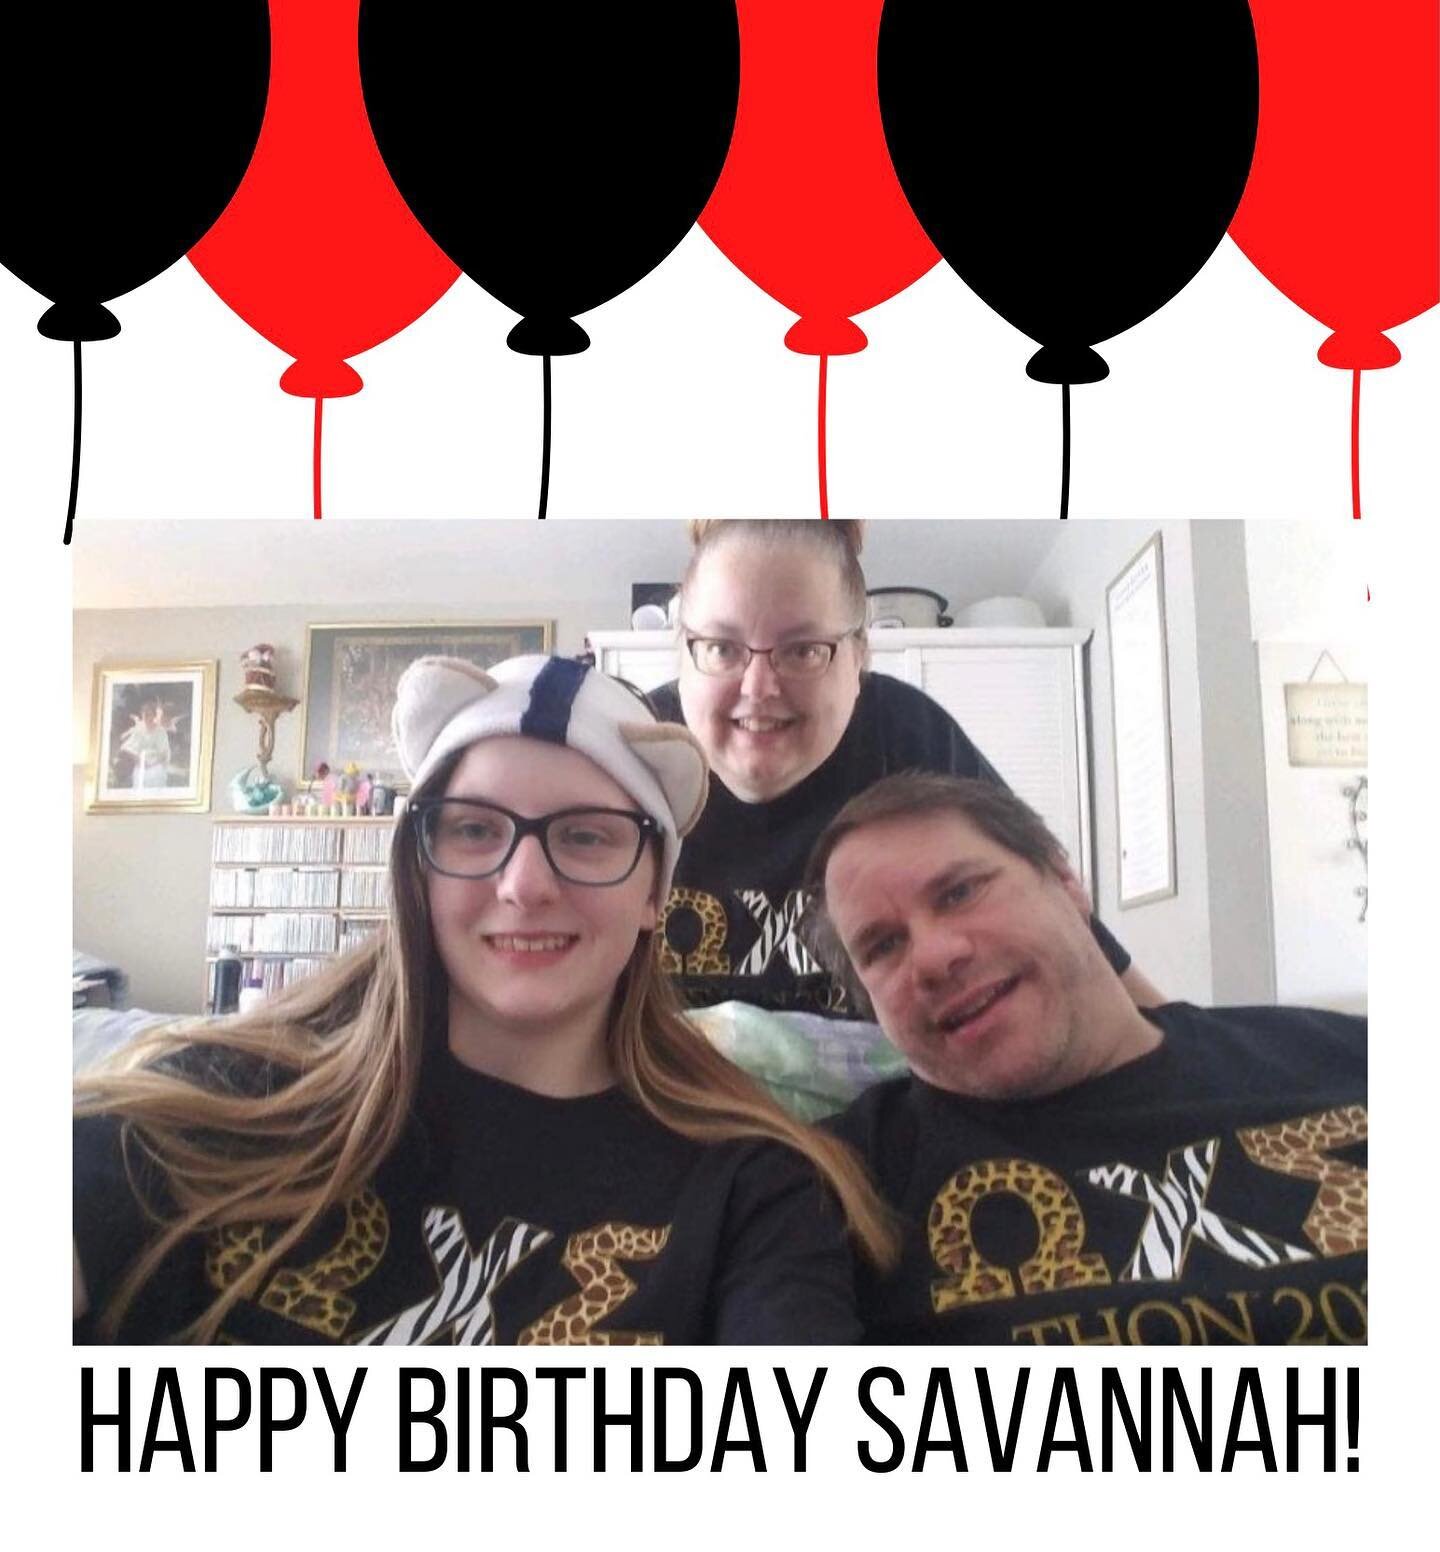 Wishing Savannah, our THON child, a very happy 18th birthday! We hope you have a great day and wish we were all there to celebrate with you. We are so glad you enjoyed your gifts and can&rsquo;t wait to see you in person again soon!